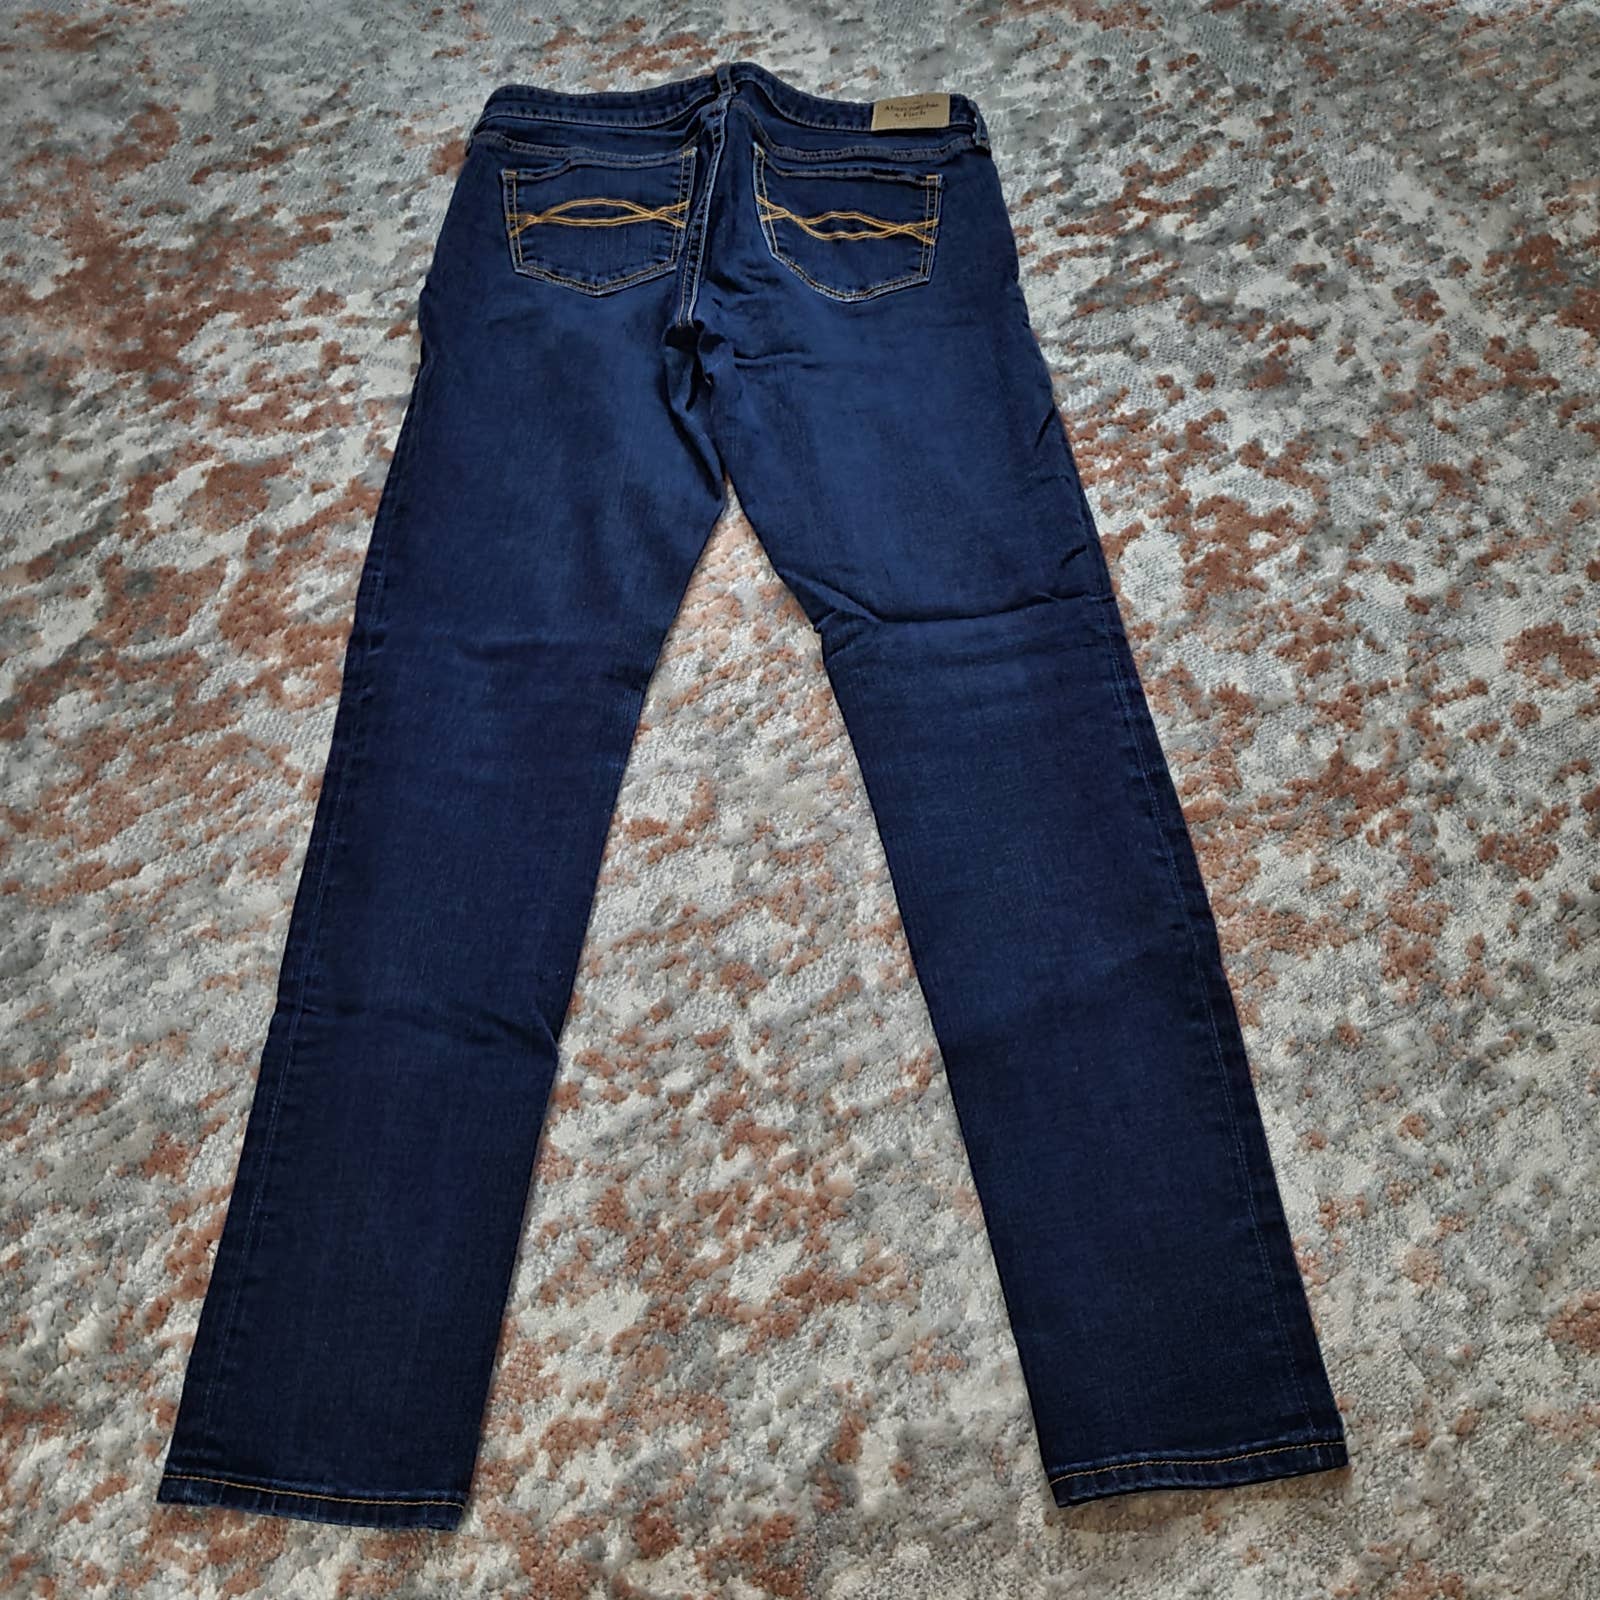 Abercrombie & Fitch Dark Wash Jeans - Size 28Markita's ClosetAbercrombie & Fitch